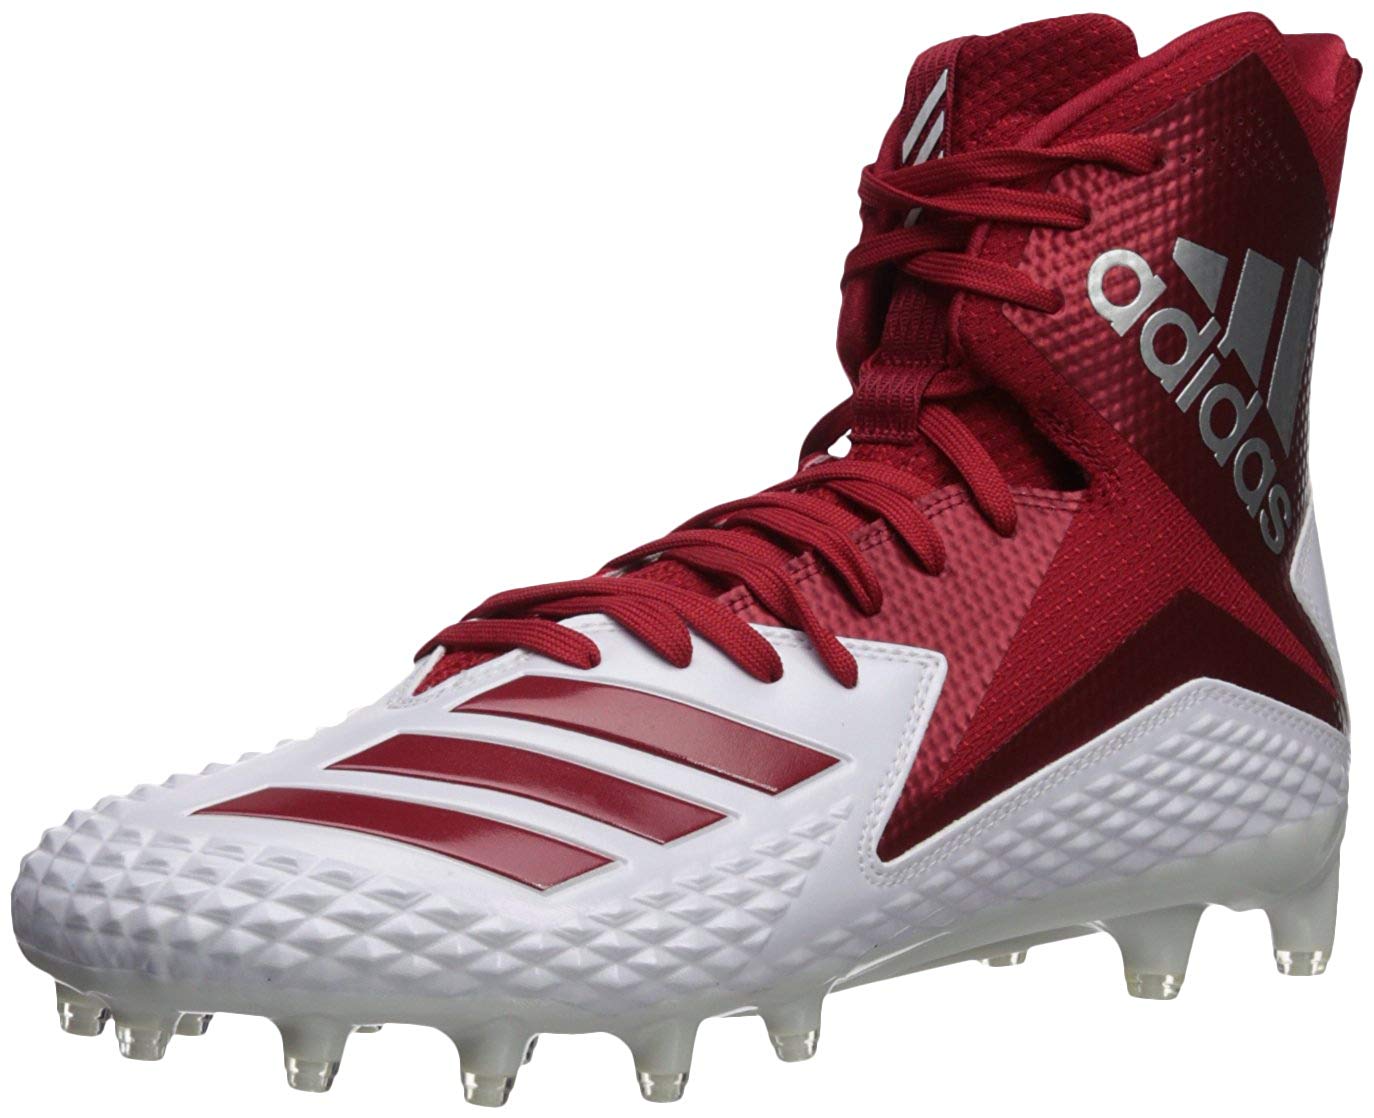 Adidas Mens Freak X Carbon High Hight Top Lace Up Soccer Sneaker, Red ...